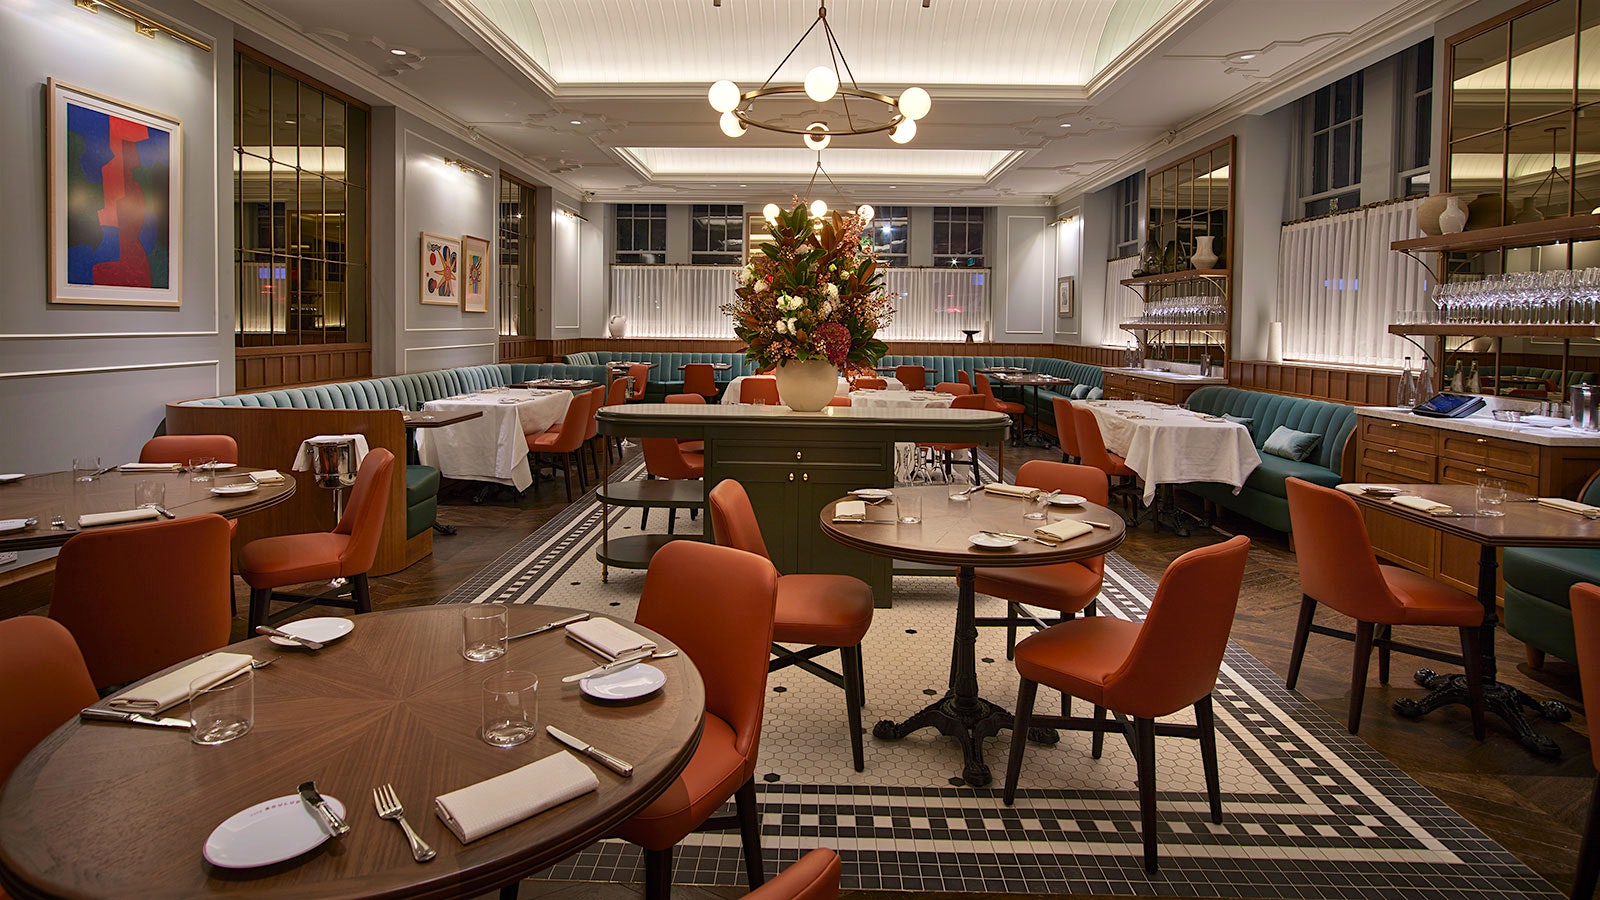  The Art Deco–inspired new interior of Café Boulud, with pieces of modern art